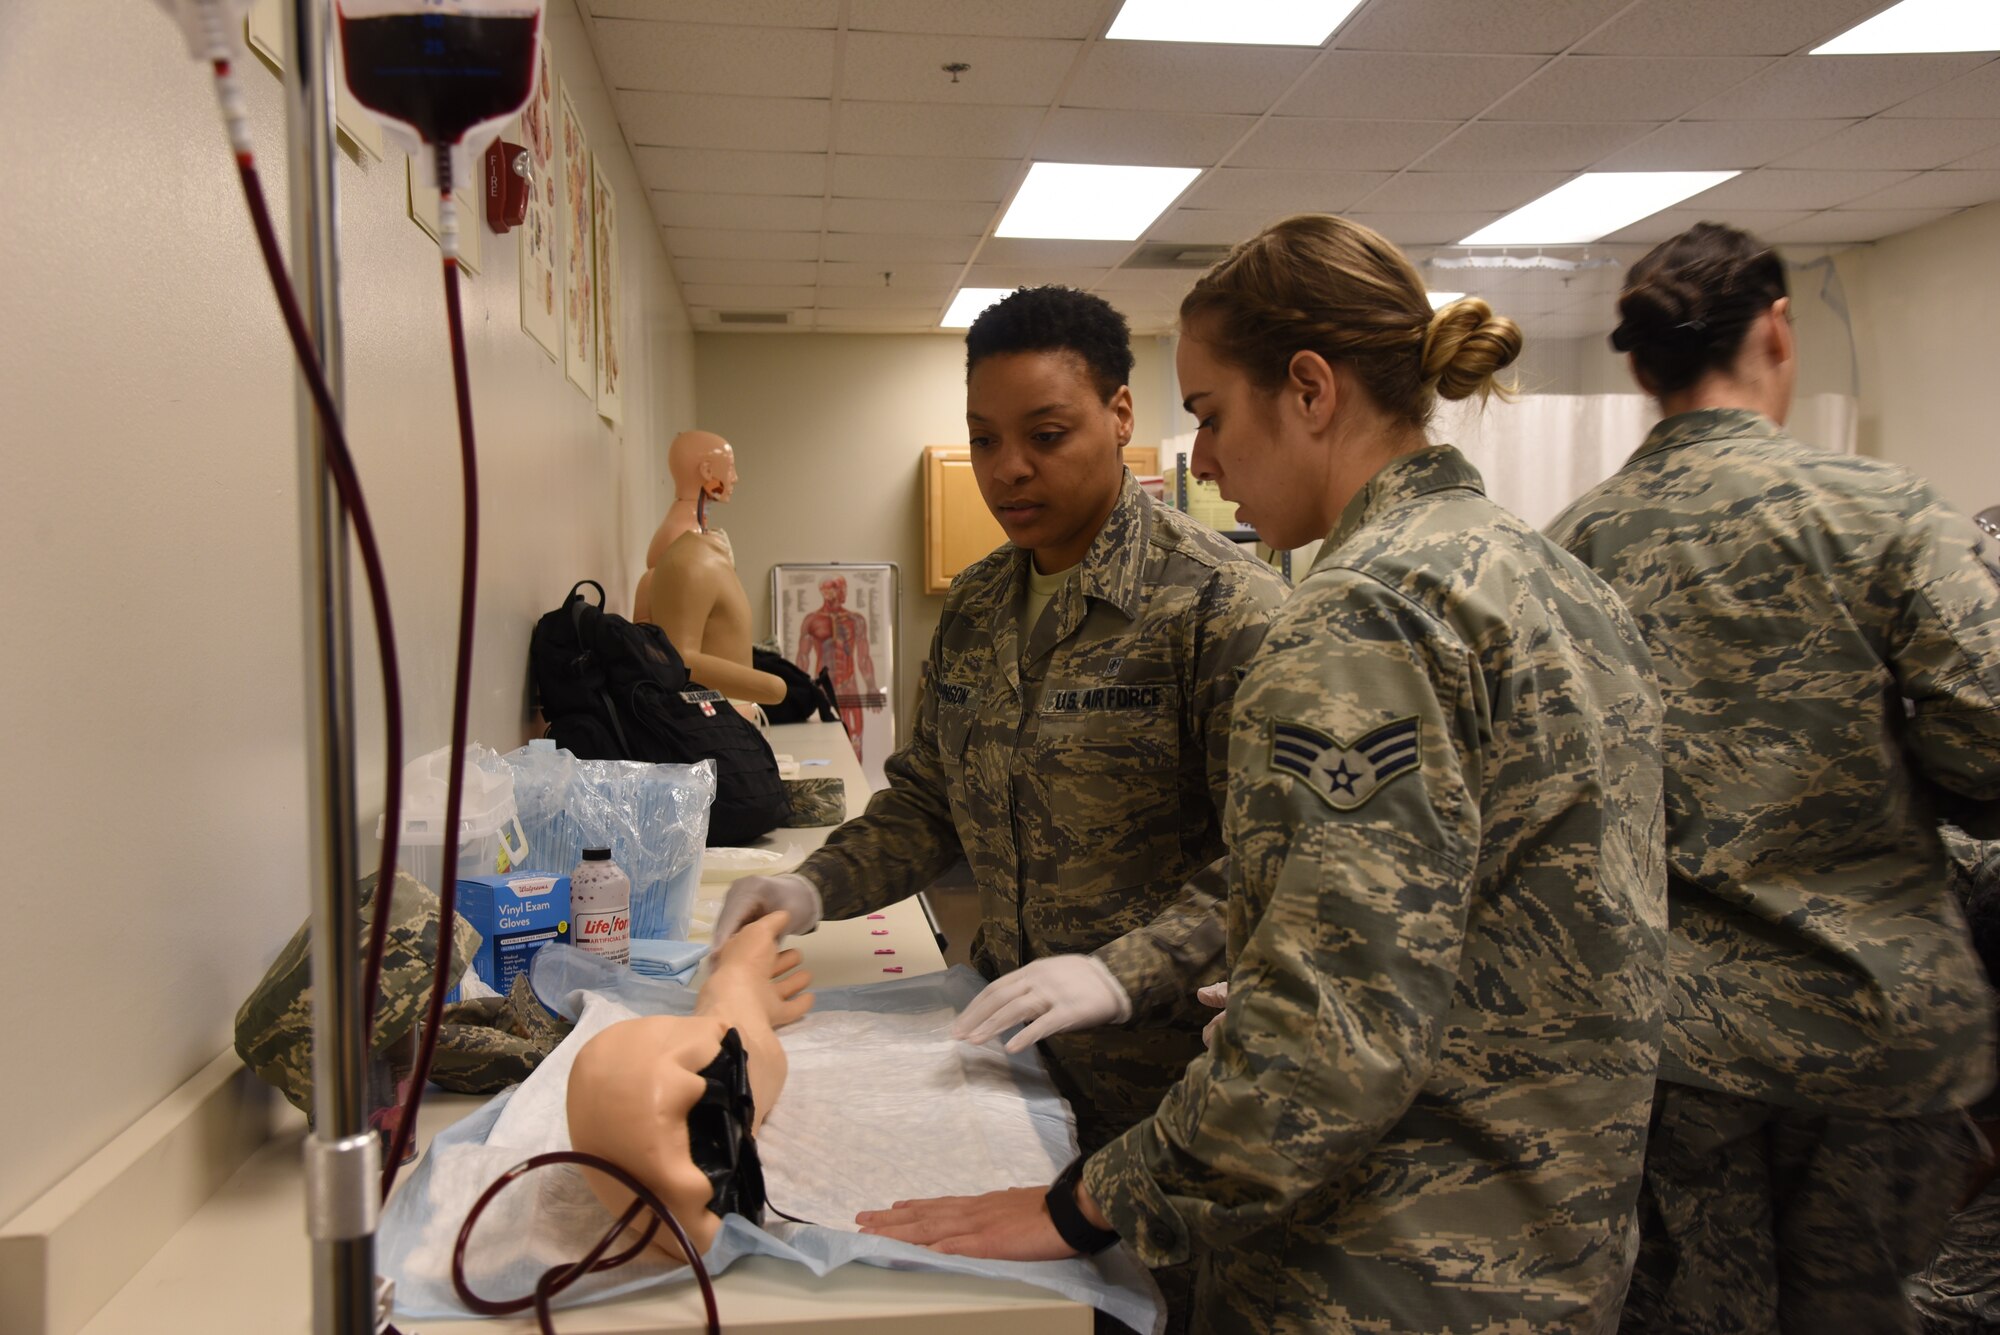 Senior Airmen Erica Johnson and Katie Cunningham, 403rd Aeromedical Staging Squadron medical technicians, work together and practice starting an IV during the escape room scenario, which was used to maintain the training requirements for medical technicians during the March Unit Training Assembly at Keesler Air Force Base.  The medical technicians had to work together to "save the life" of their patient during the training before they could escape. (U.S. Air Force photo by Jessica L. Kendziorek)